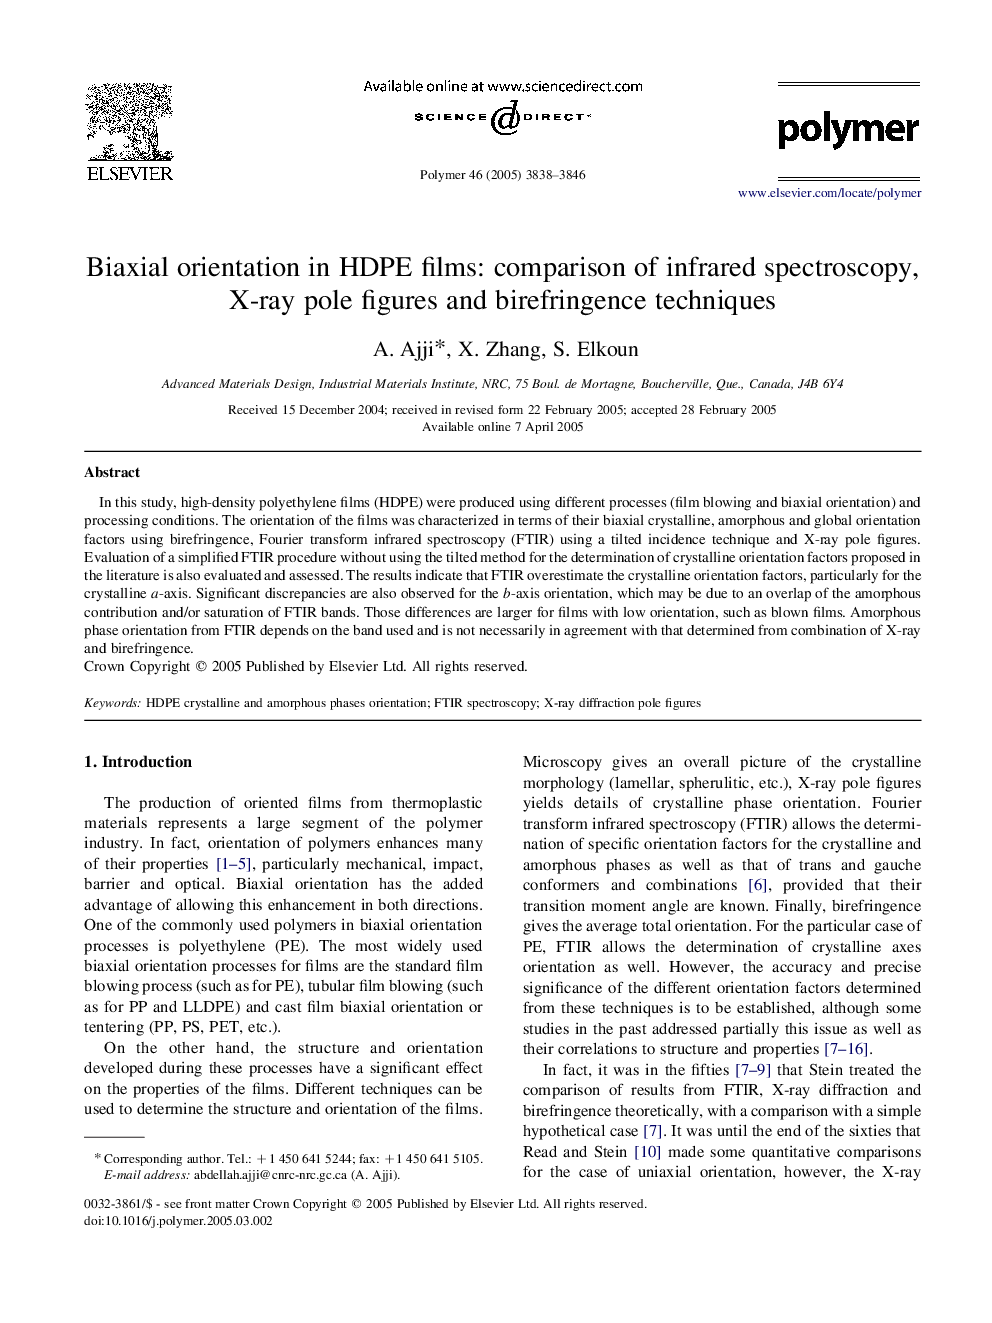 Biaxial orientation in HDPE films: comparison of infrared spectroscopy, X-ray pole figures and birefringence techniques